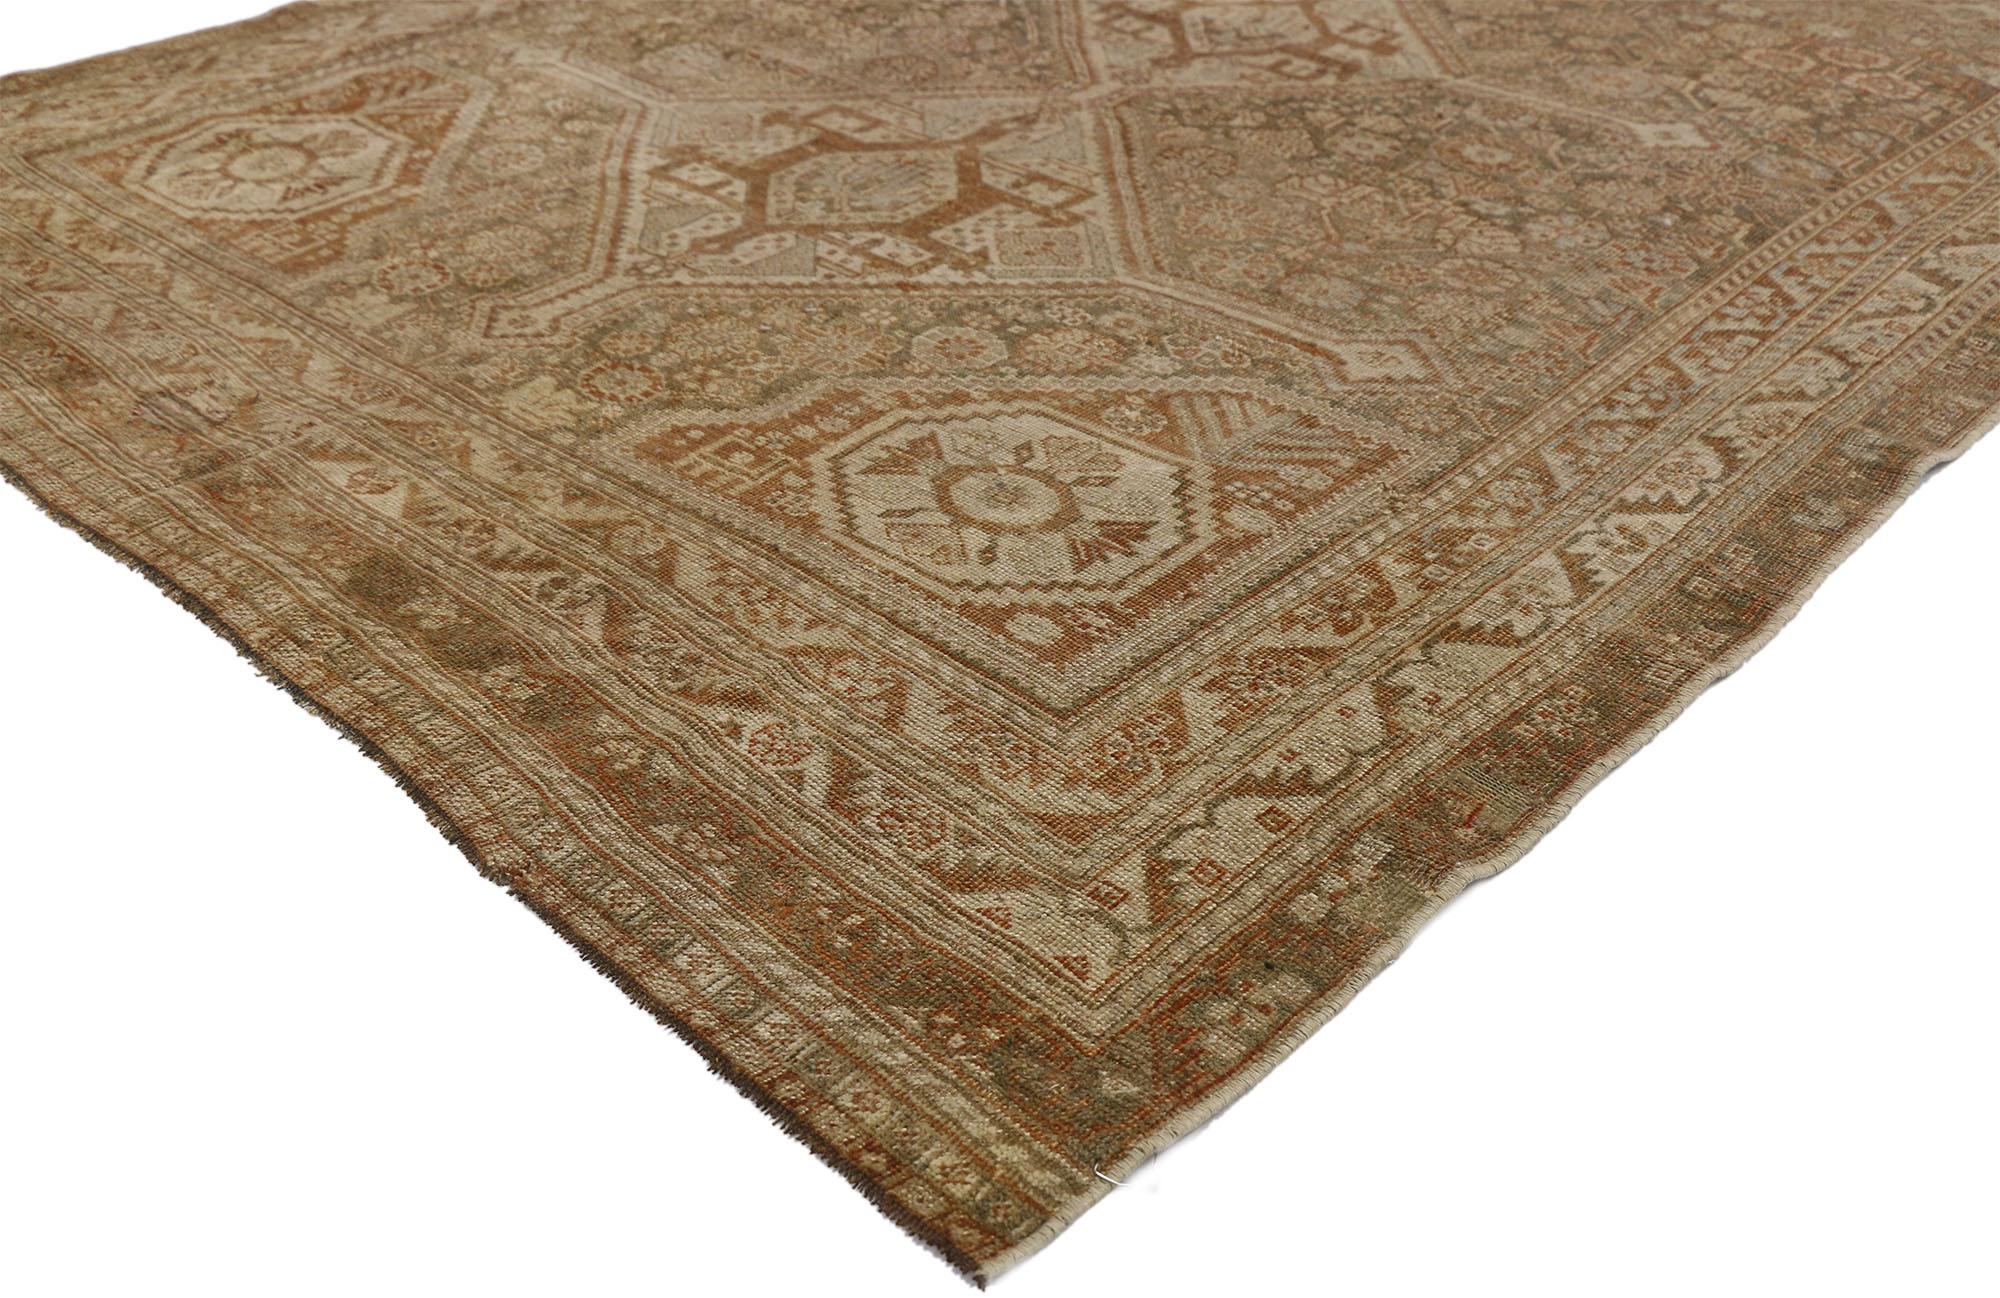 52434, distressed antique Persian Shiraz rug with American Craftsman Rustic style. This understated and subtle antique Persian Shiraz rug features an angular pole medallion with lozenges and extended anchor pendants surrounded by a variety of